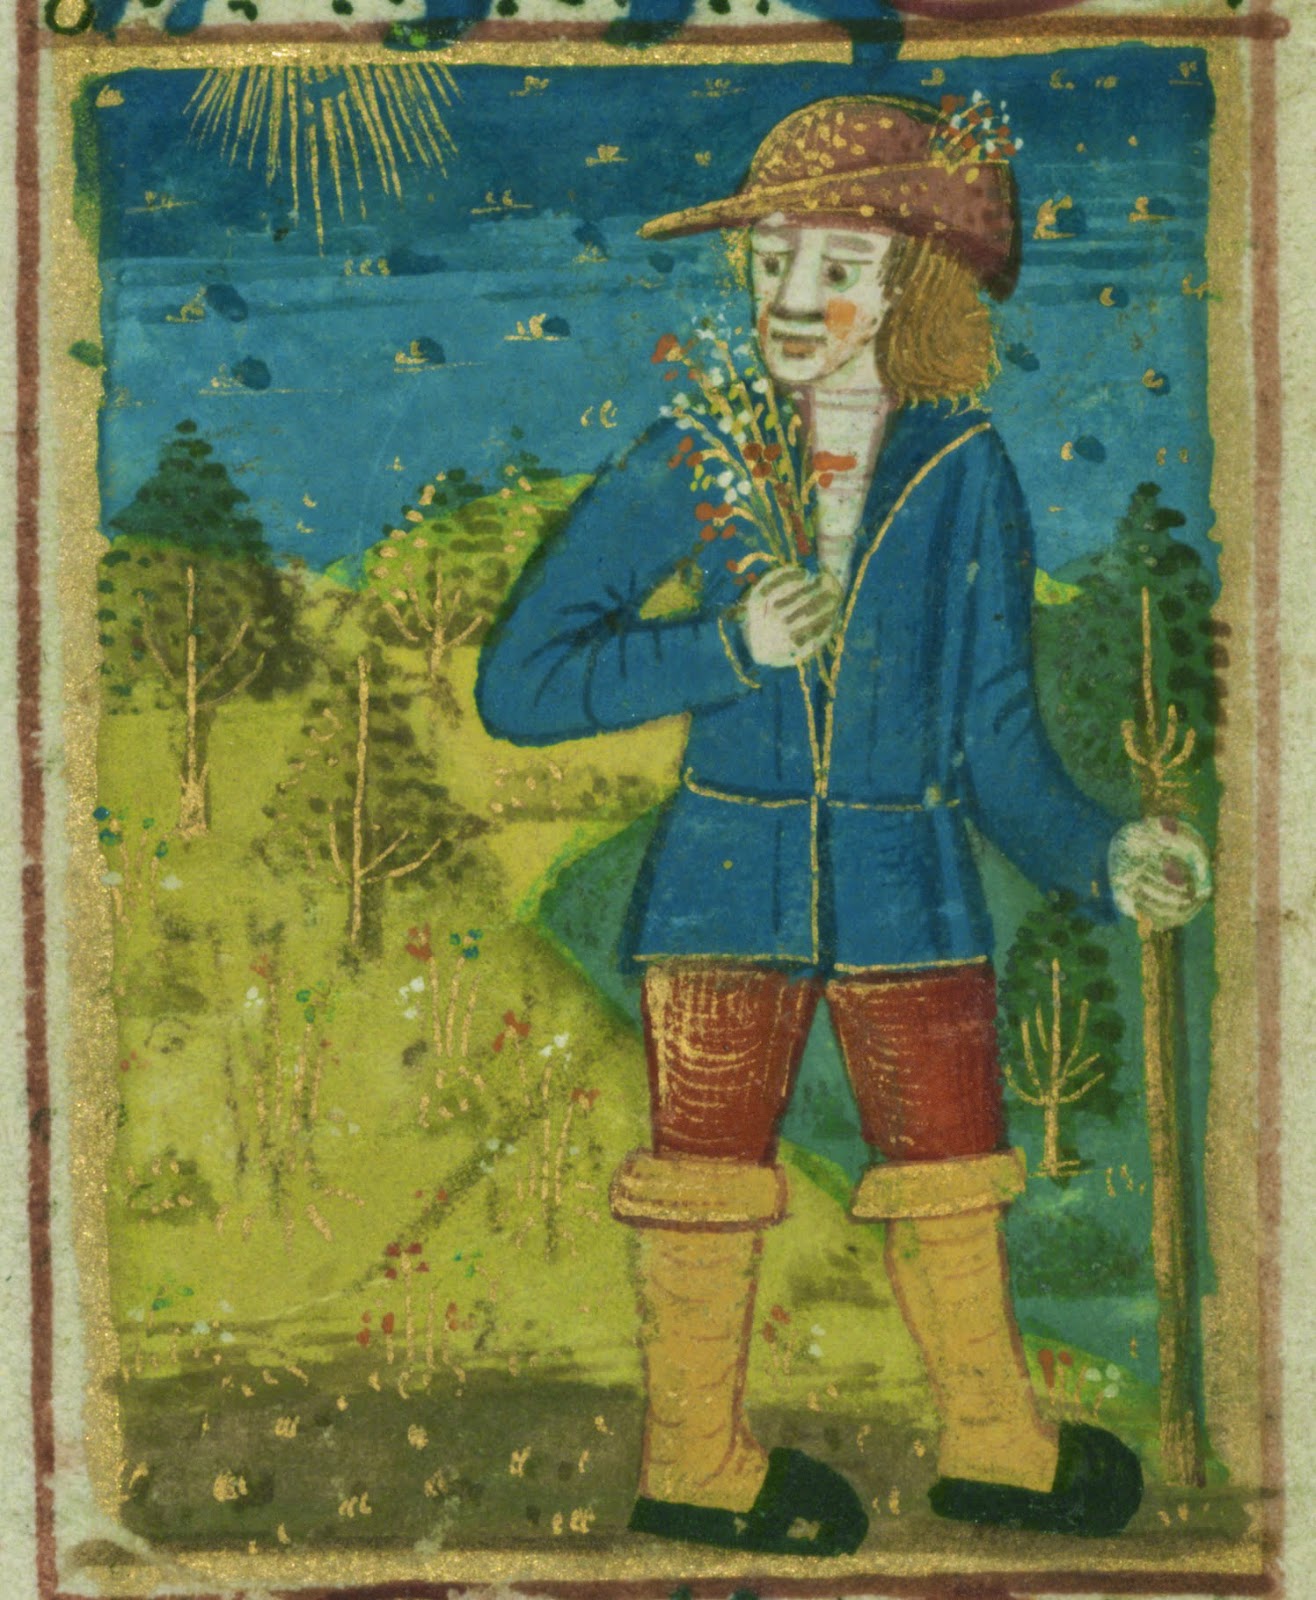 How to Prepare for Spring, 1528